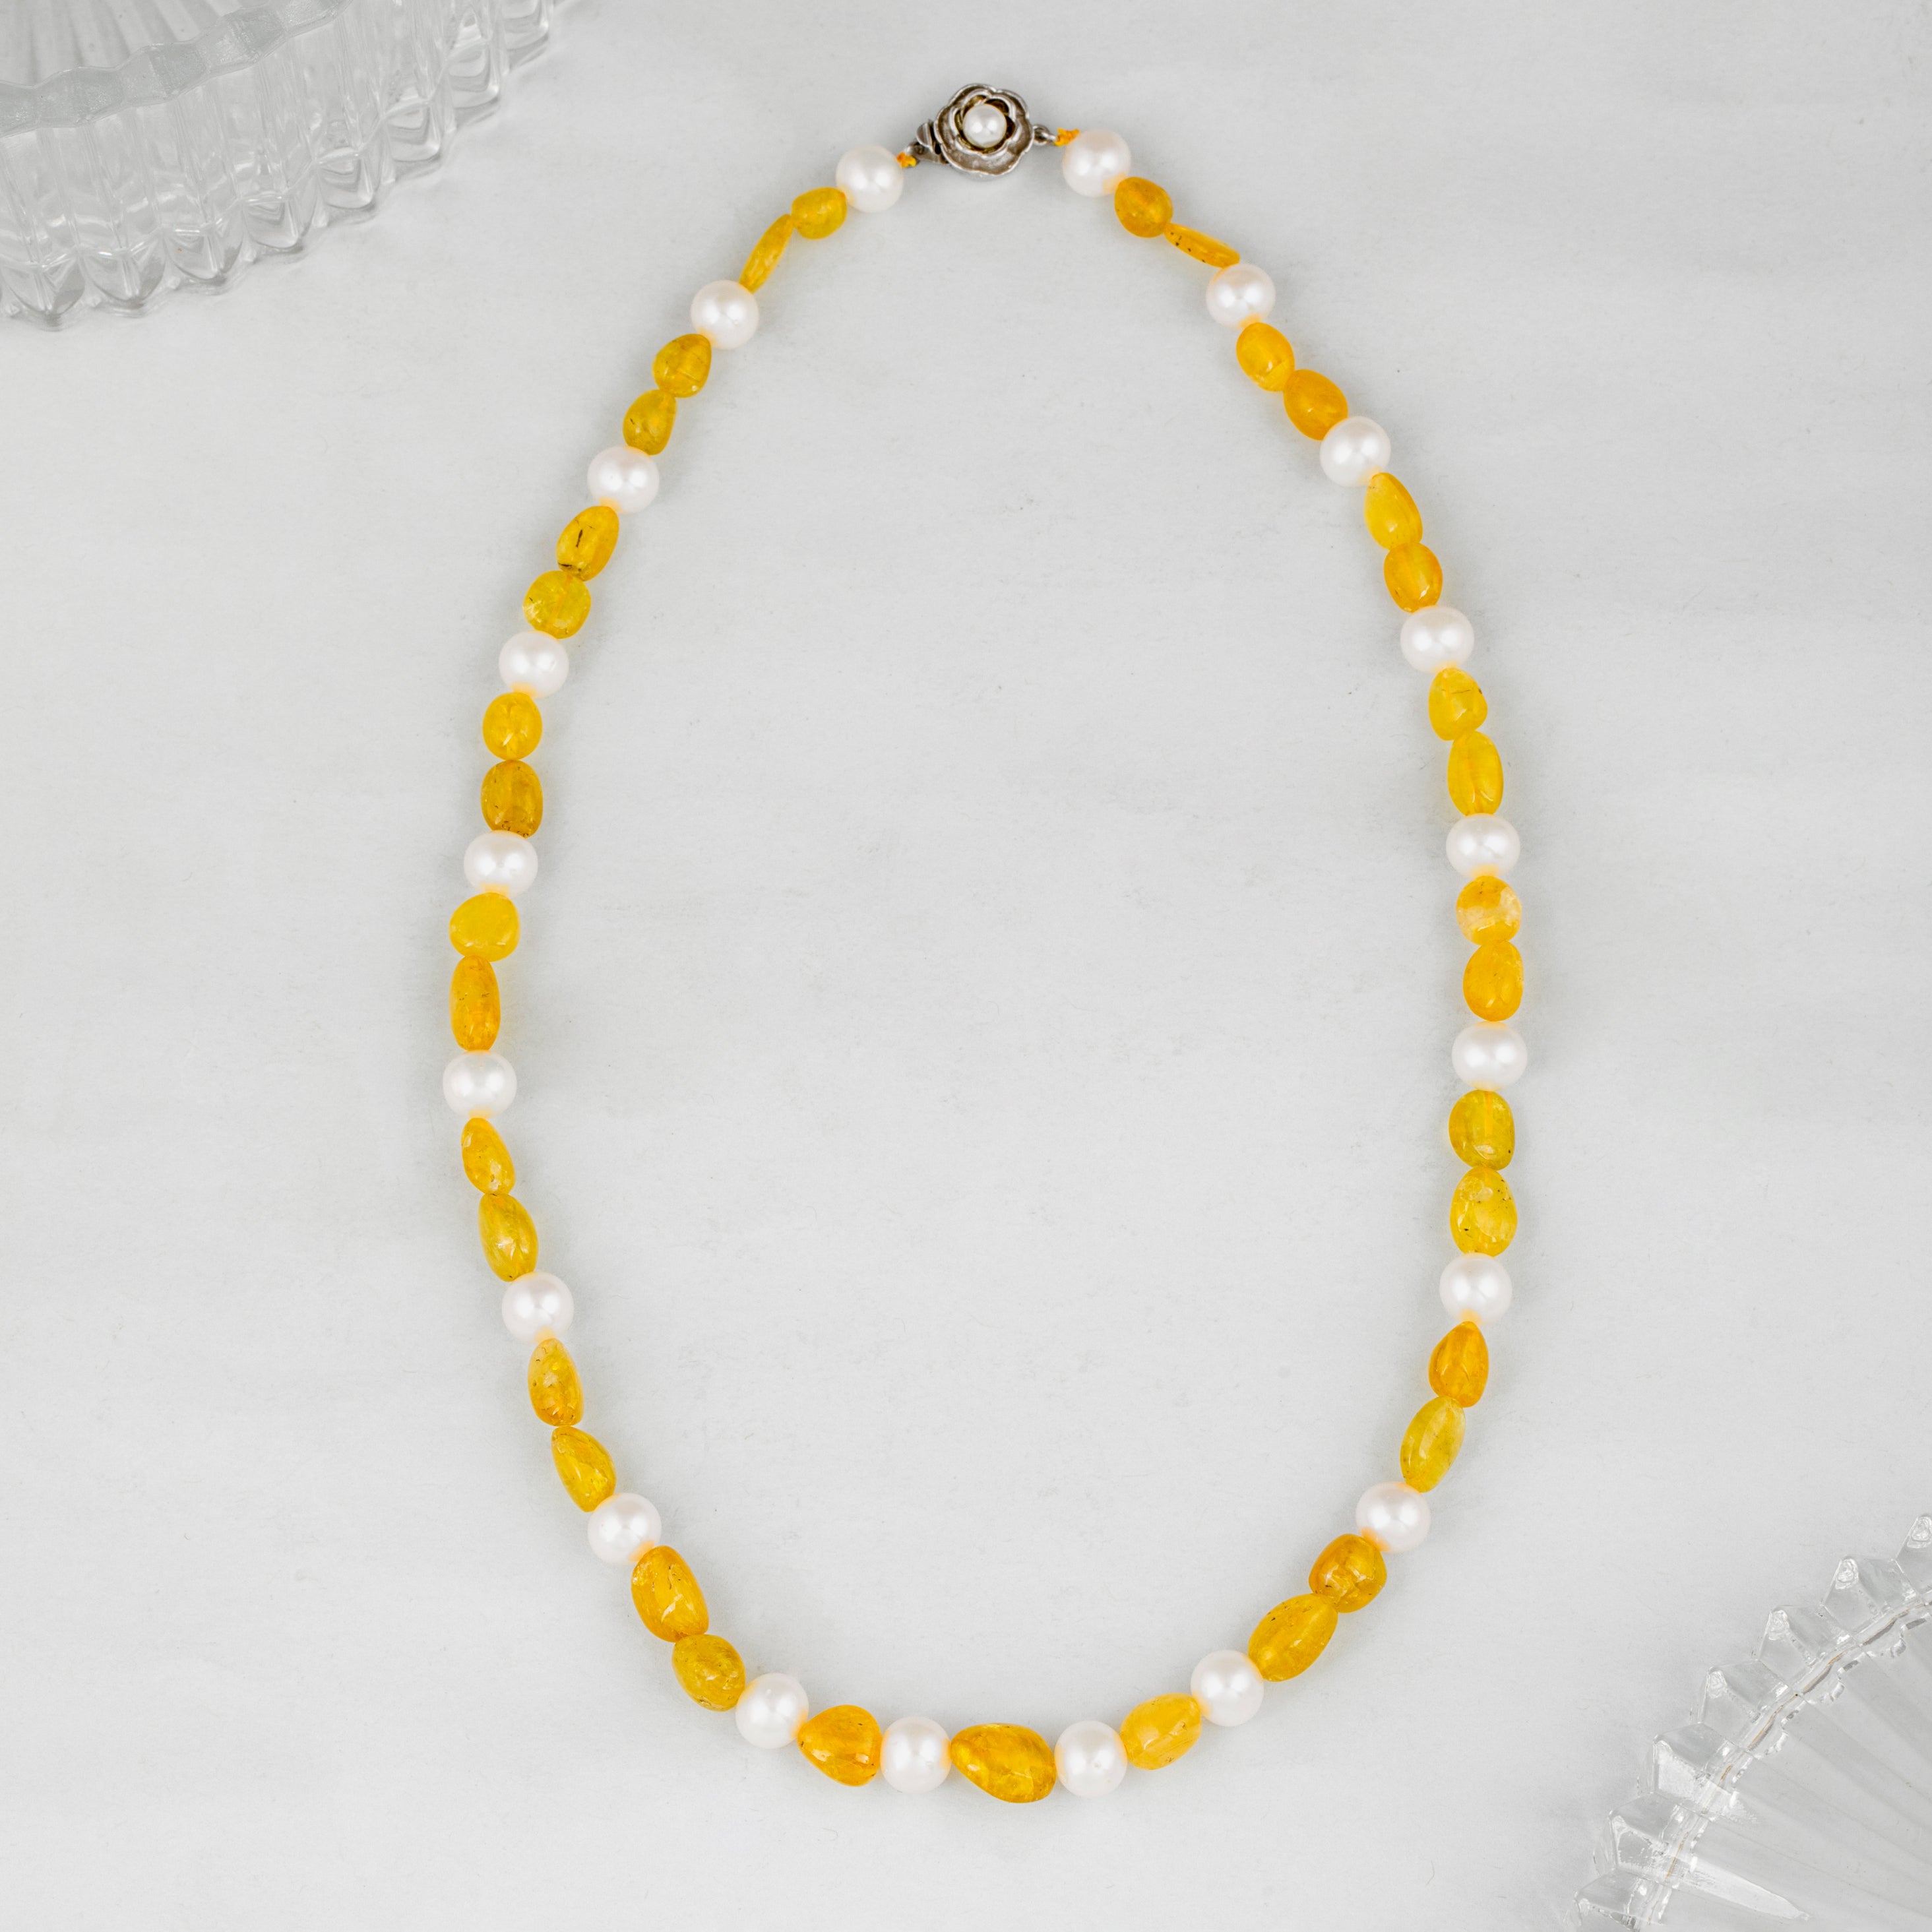 Sunshine Beads and Freshwater Pearl Necklace